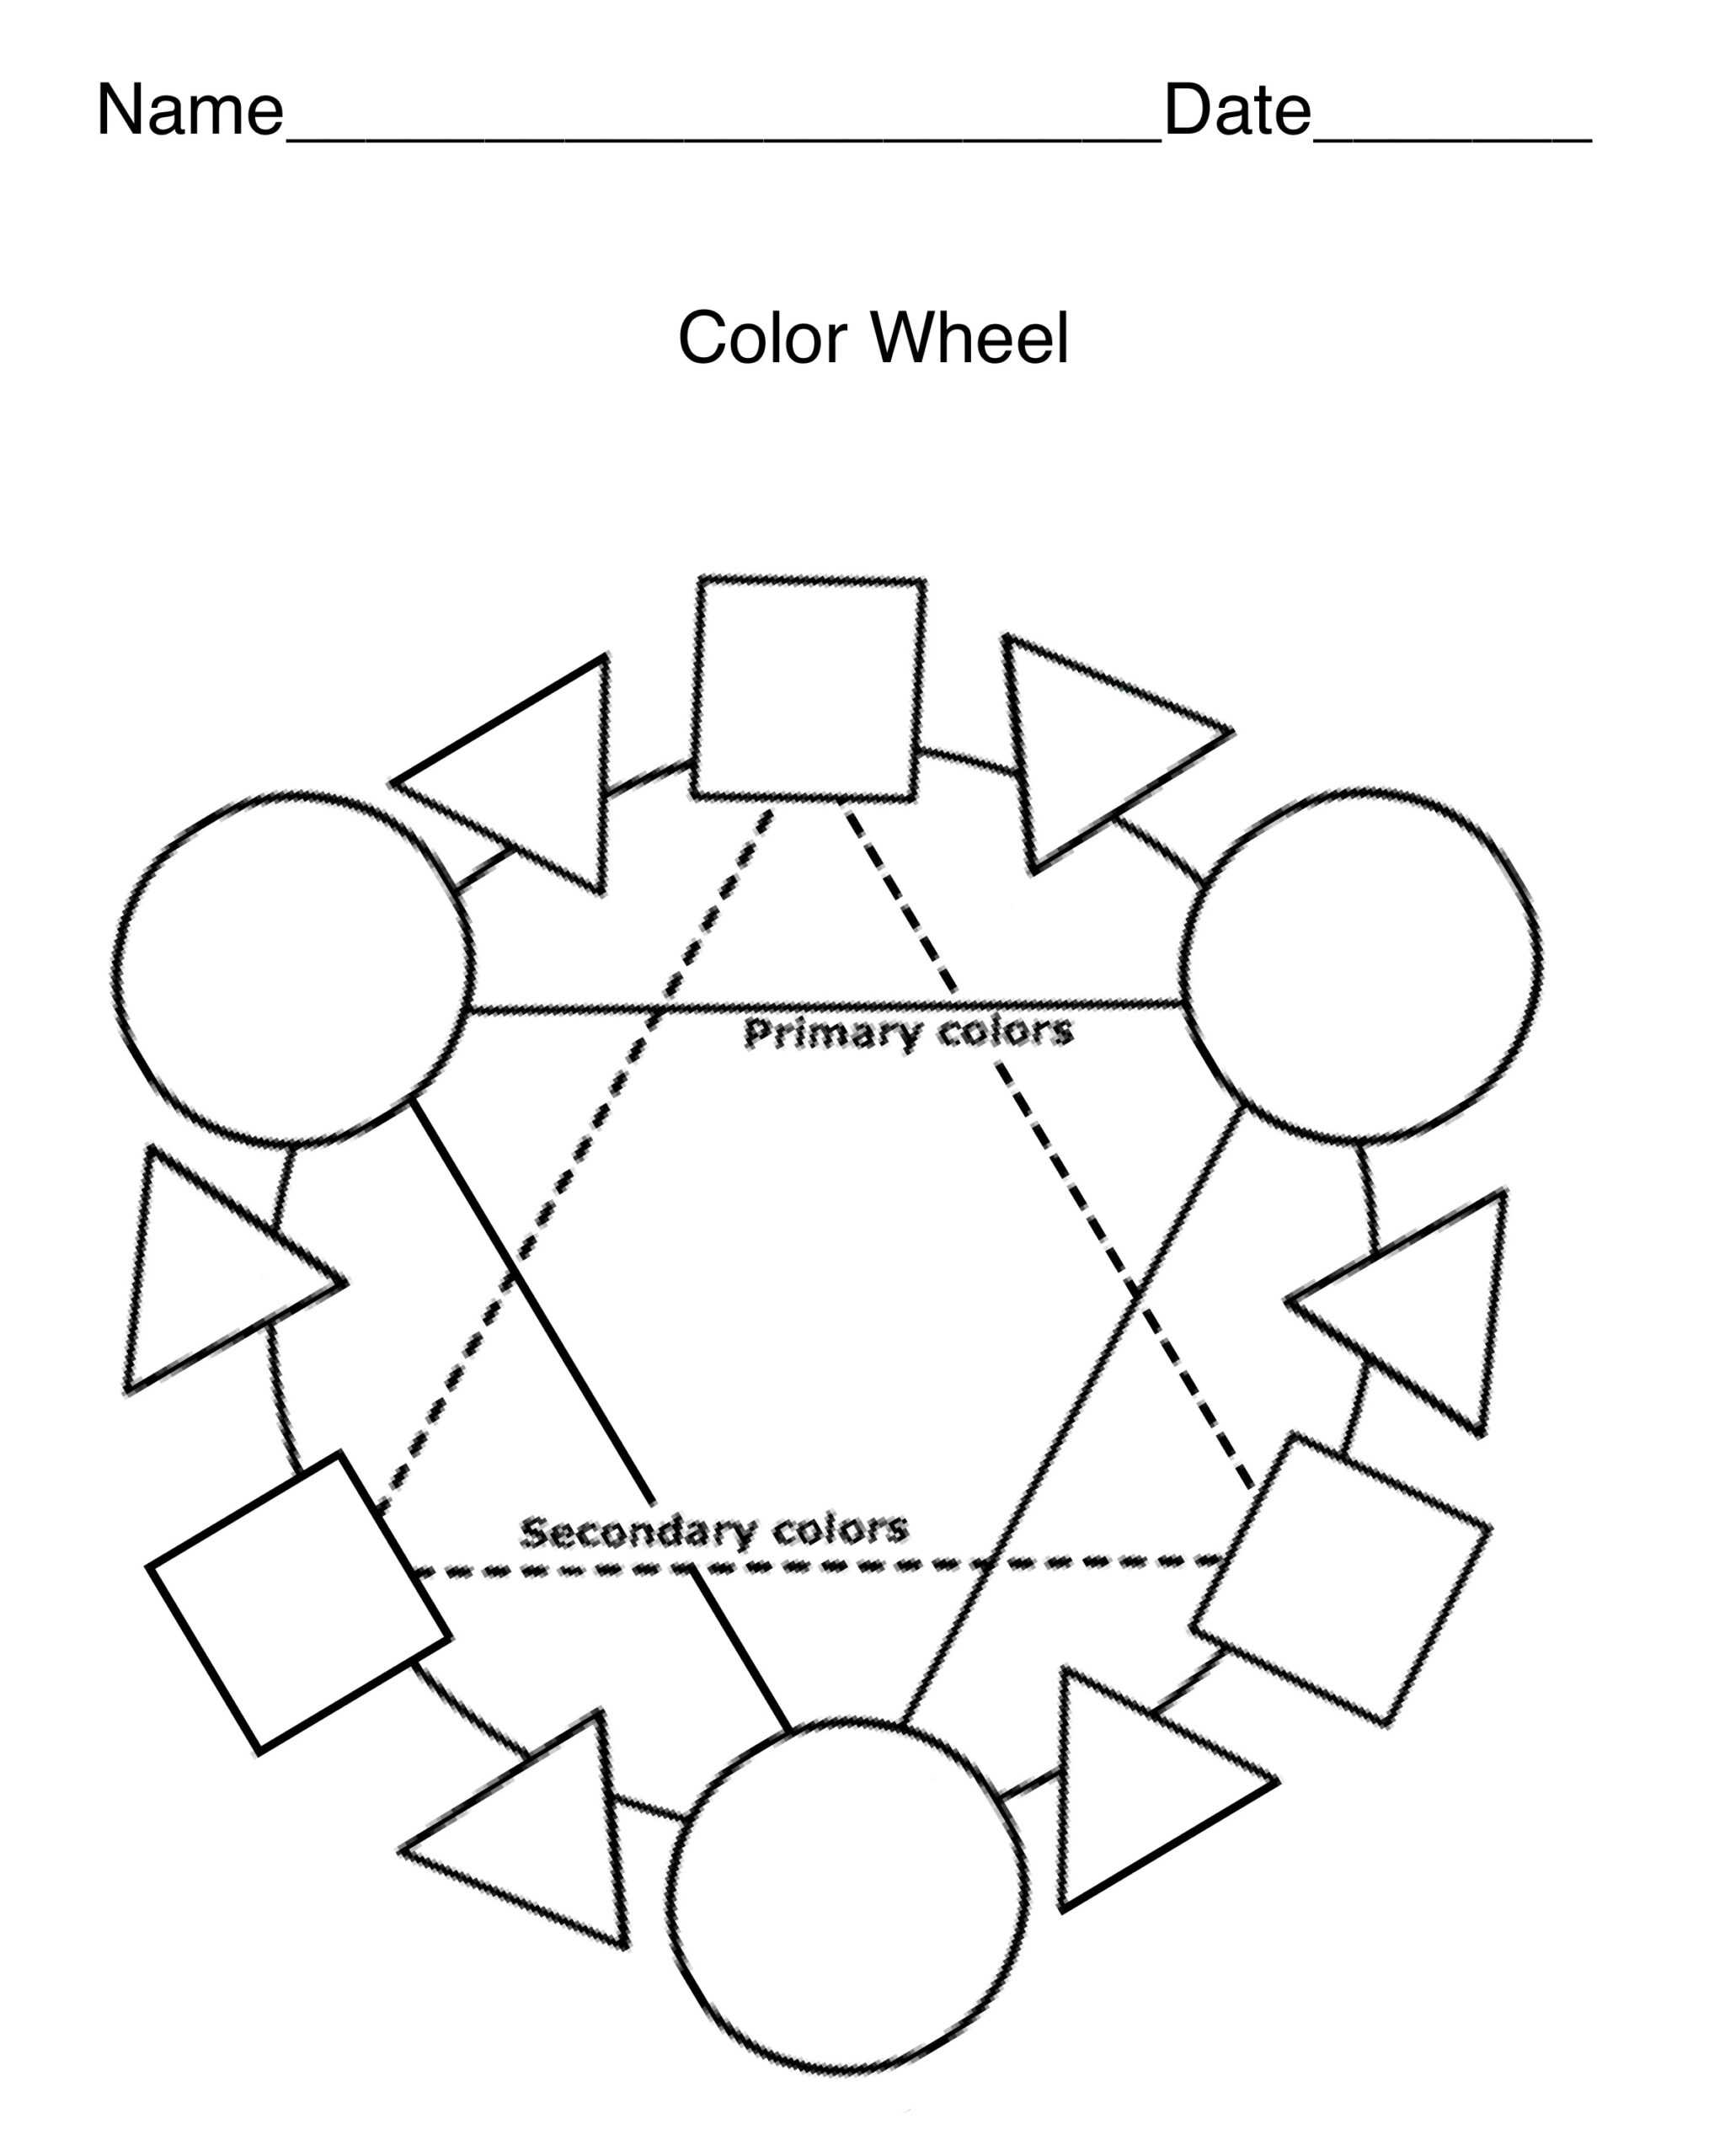 Blank Color Wheel Template. Tertiary Colors Blank Color With Regard To Blank Color Wheel Template